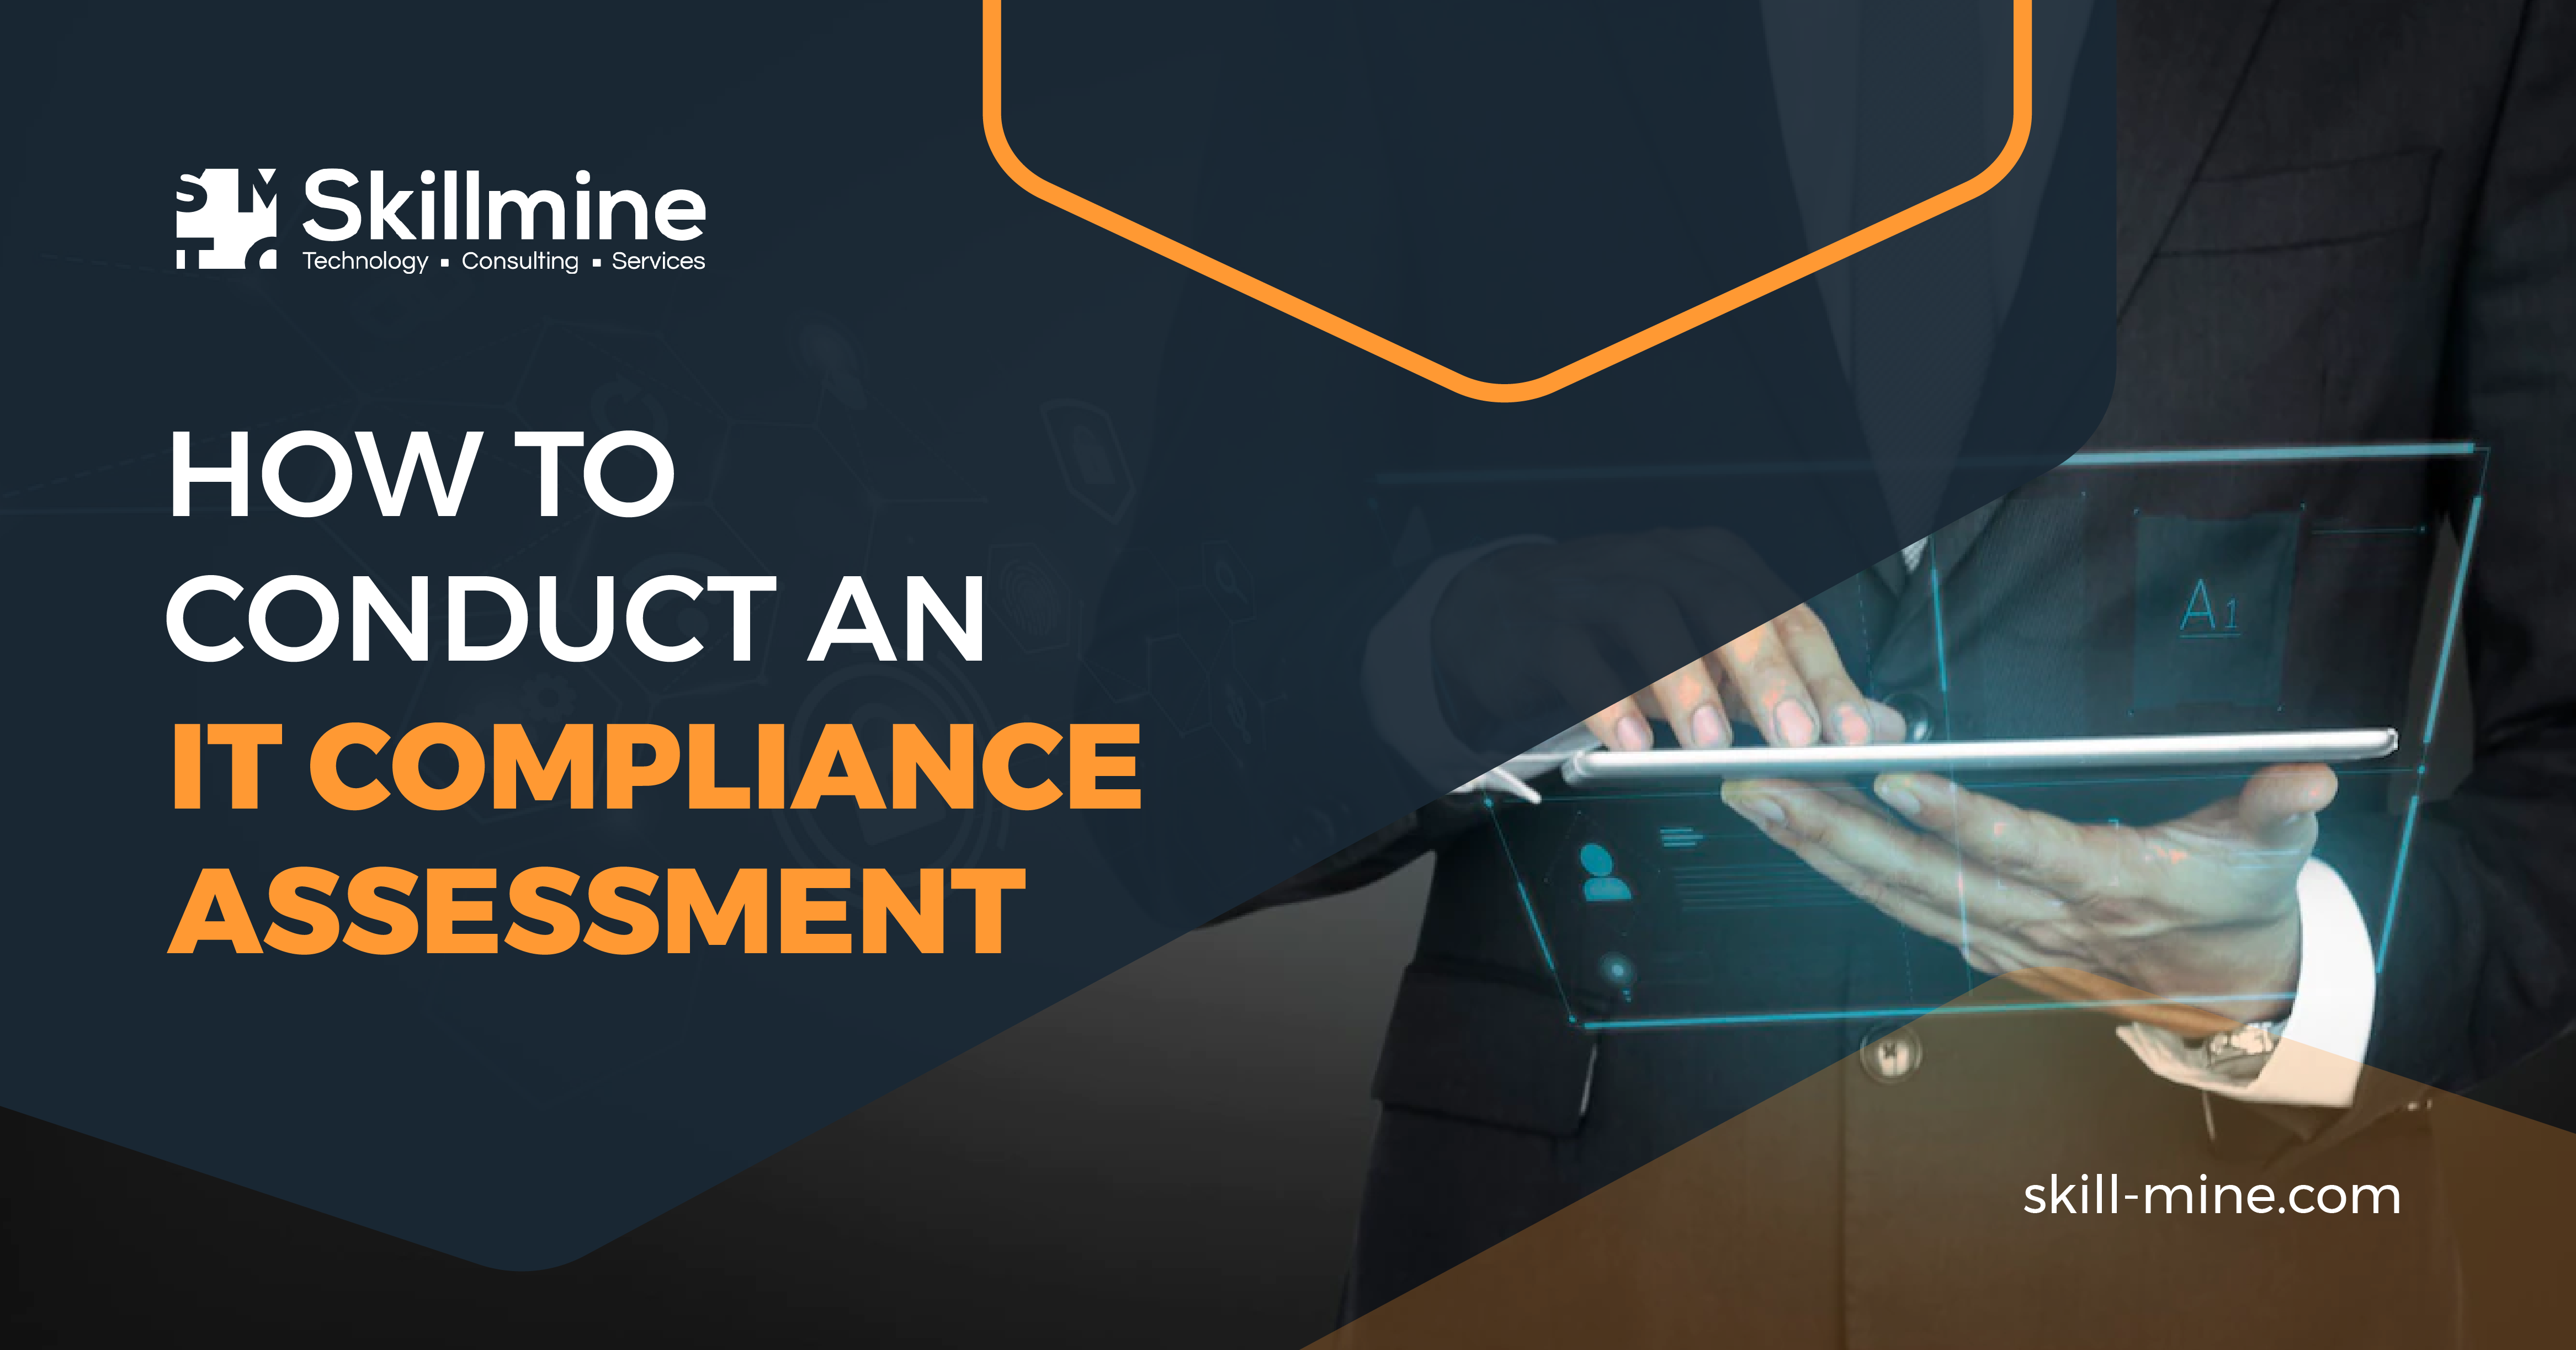 How to Conduct an IT Compliance Assessment